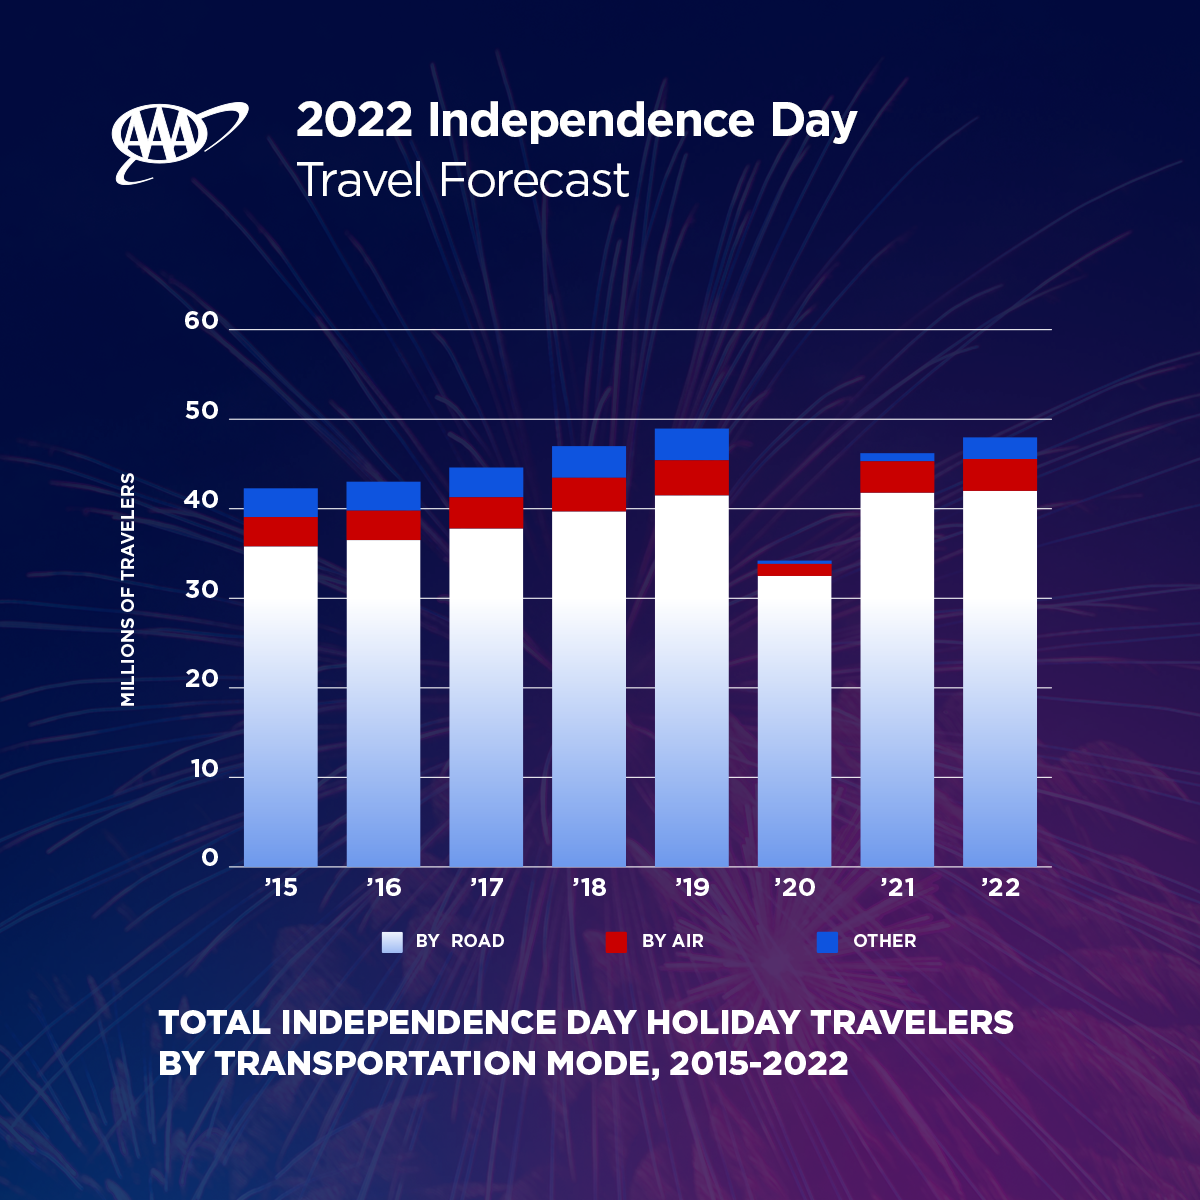 https://www.worldpropertyjournal.com/news-assets/22-1152-TRV_Independence-Day-Forecast-Graphics_chart-1200.png